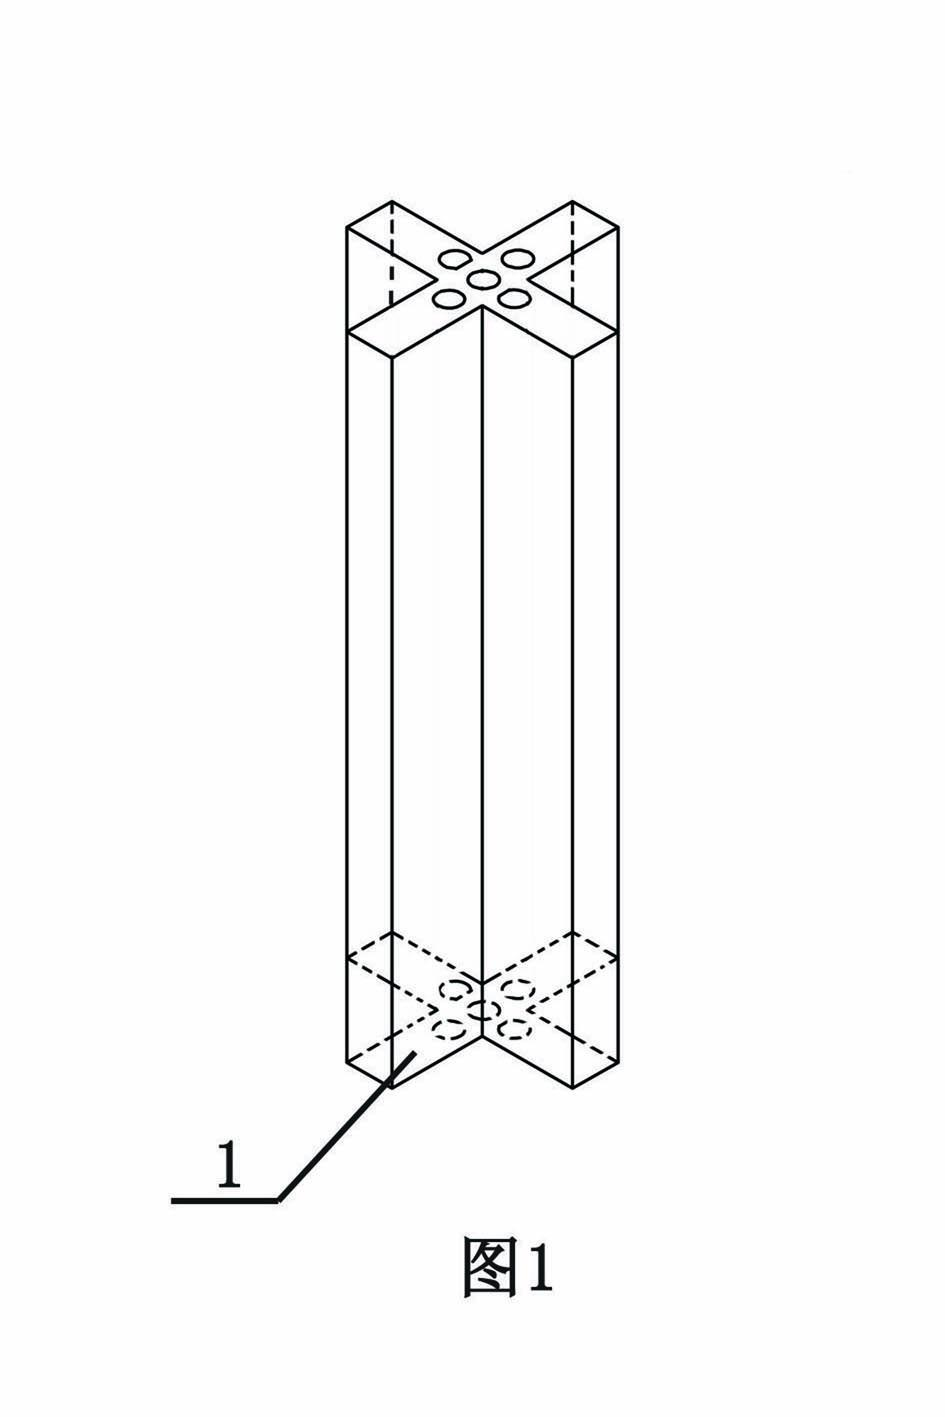 Prefabricated column of reserved concealed column channel, concealed column type complete assembled earthquake-resistant building and its method